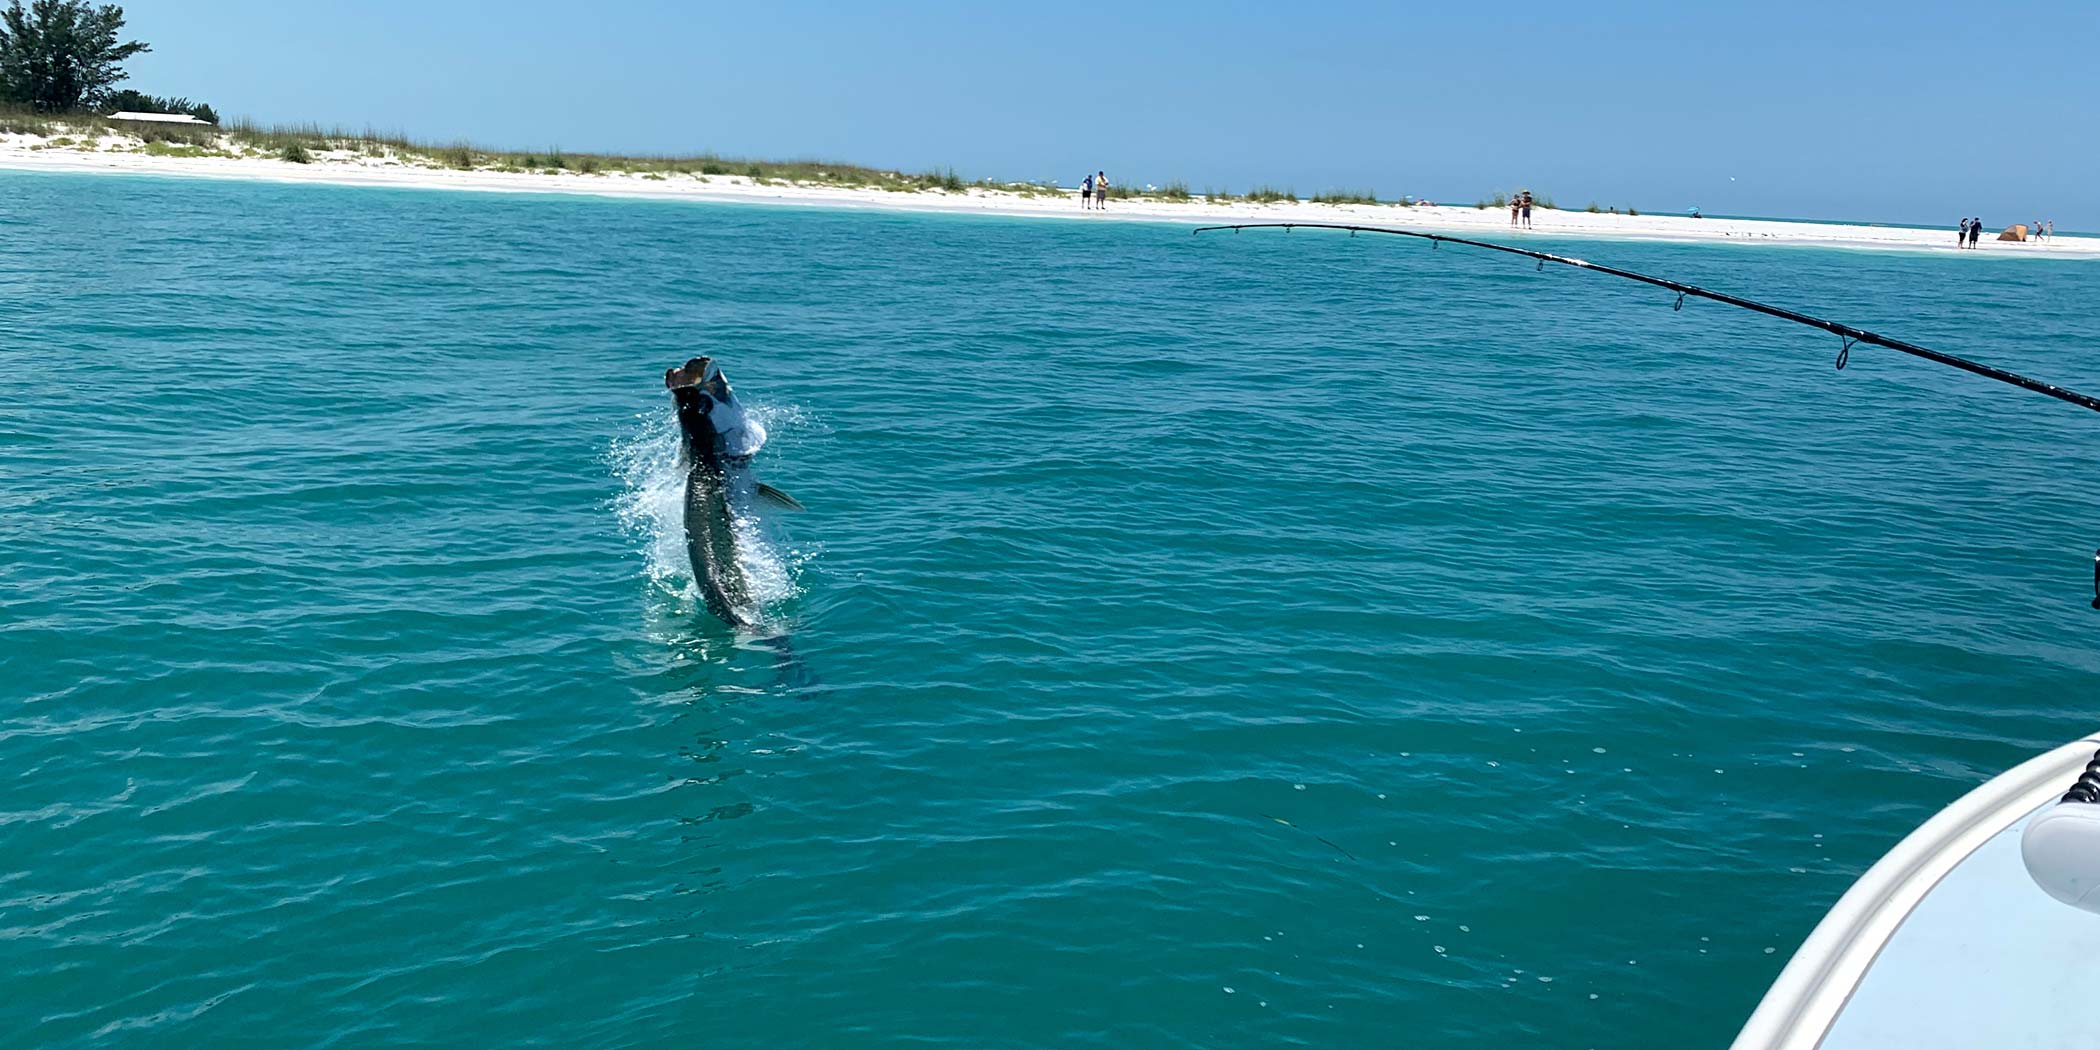 Fighting a tarpon can be a thrilling summer experience on Florida's coastline.